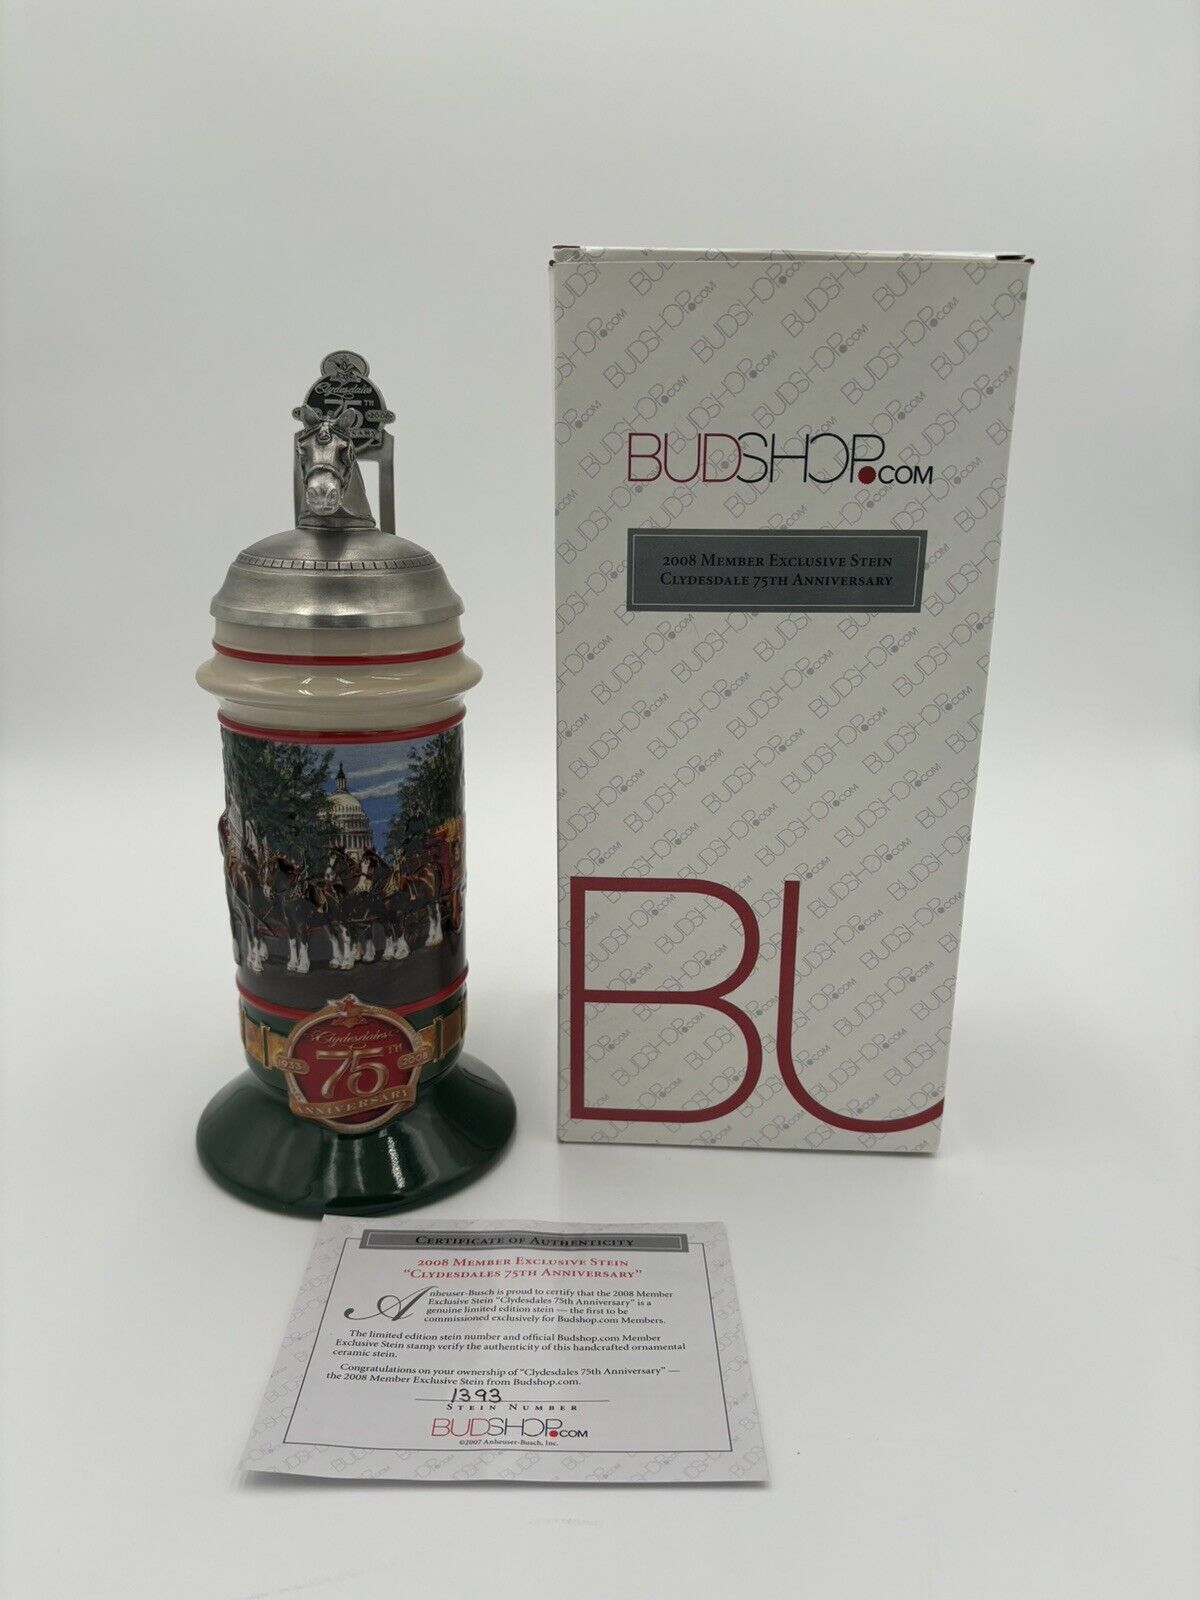 Budweiser 2008 Members Exclusive Stein Clydesdale 75th Anniversary BSM1